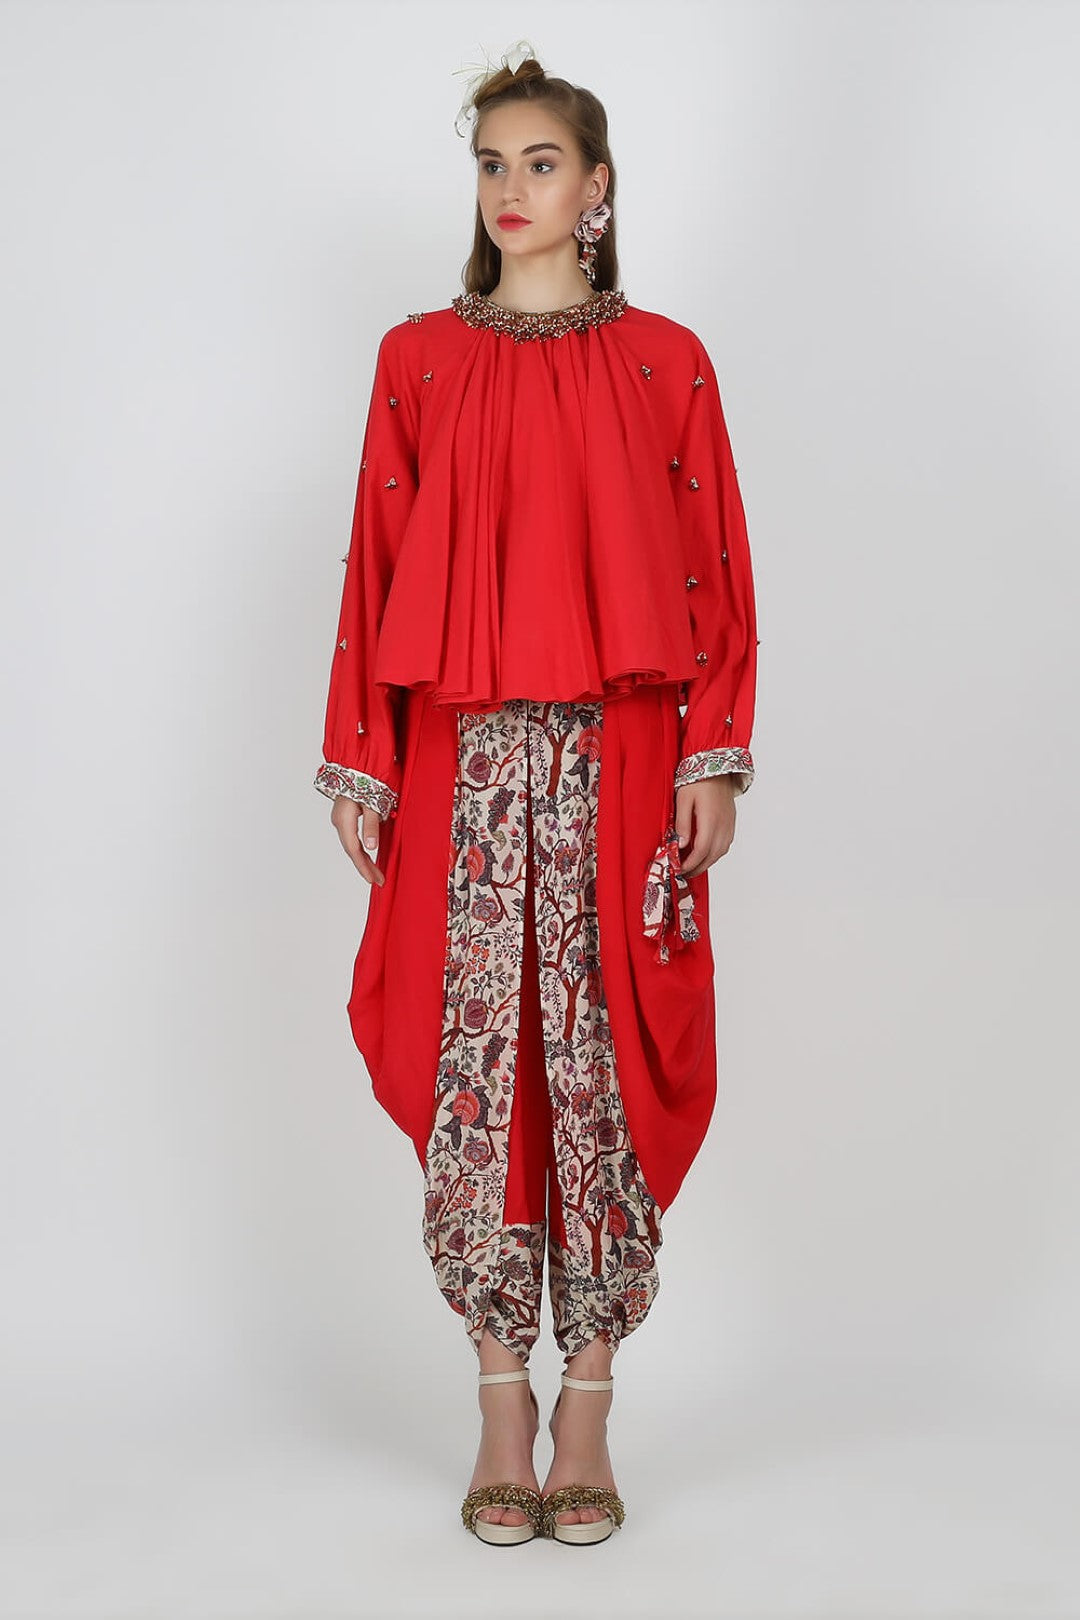 embellished peasant top paired with printed detail dhoti